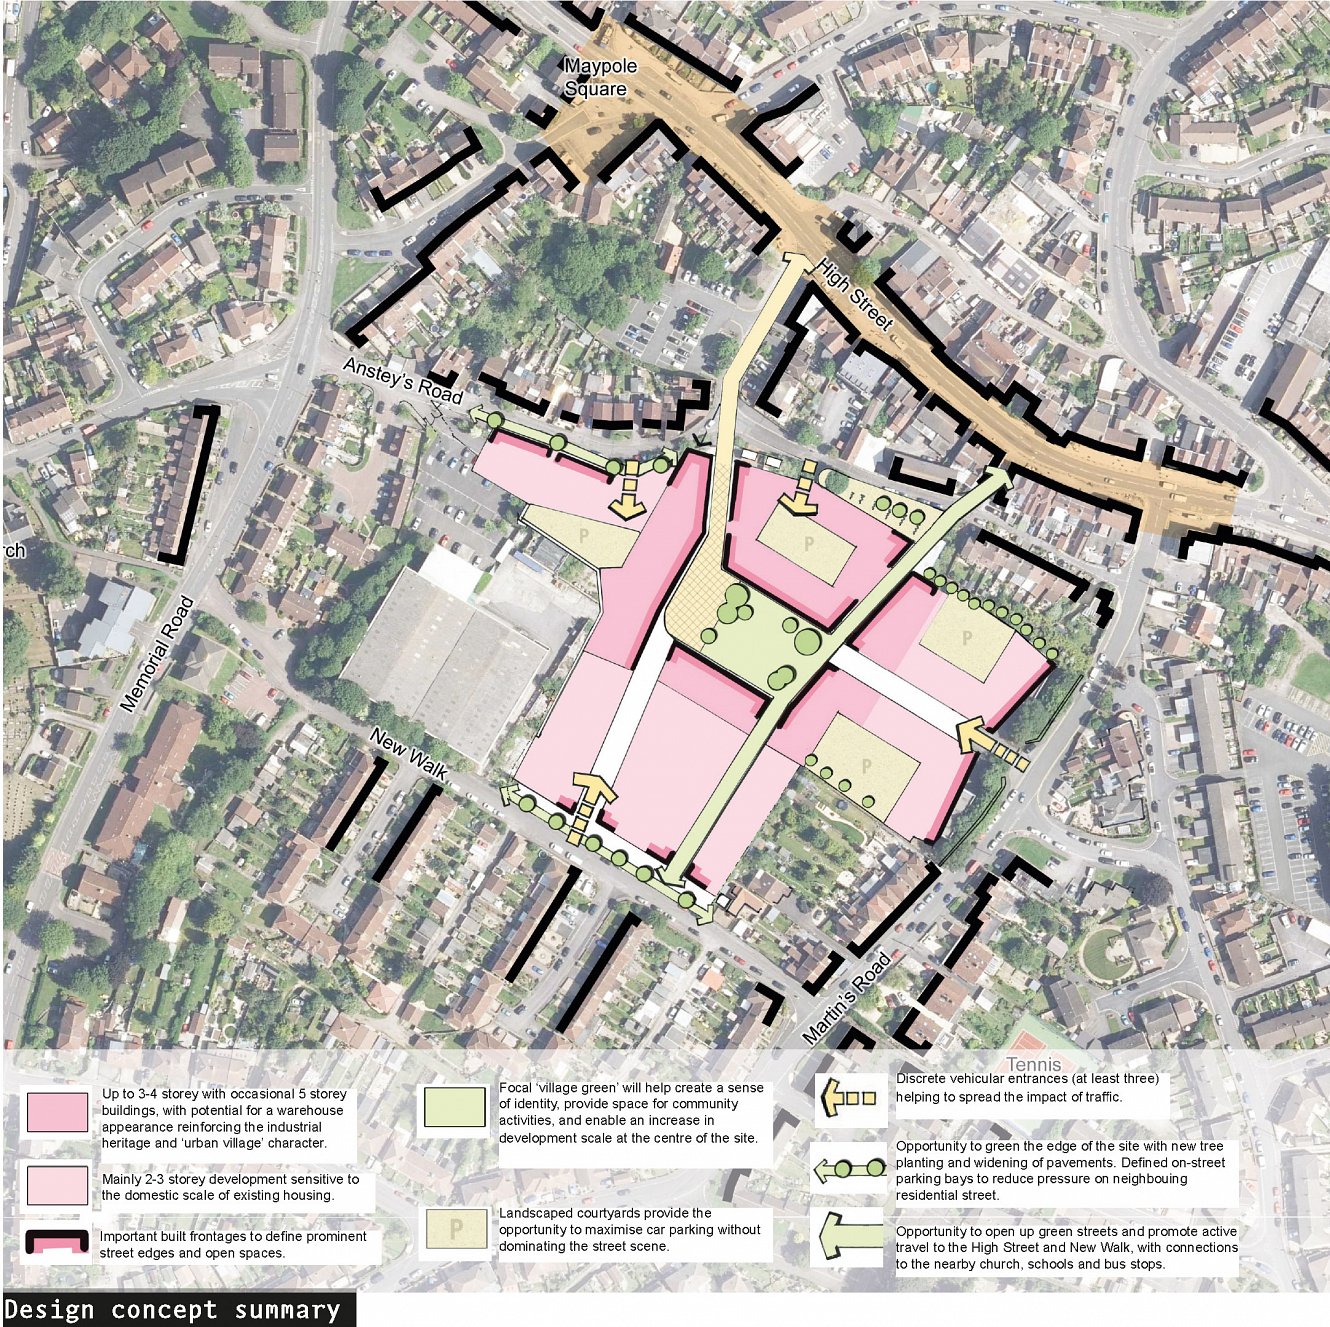 Application submitted for redevelopment of brownfield site